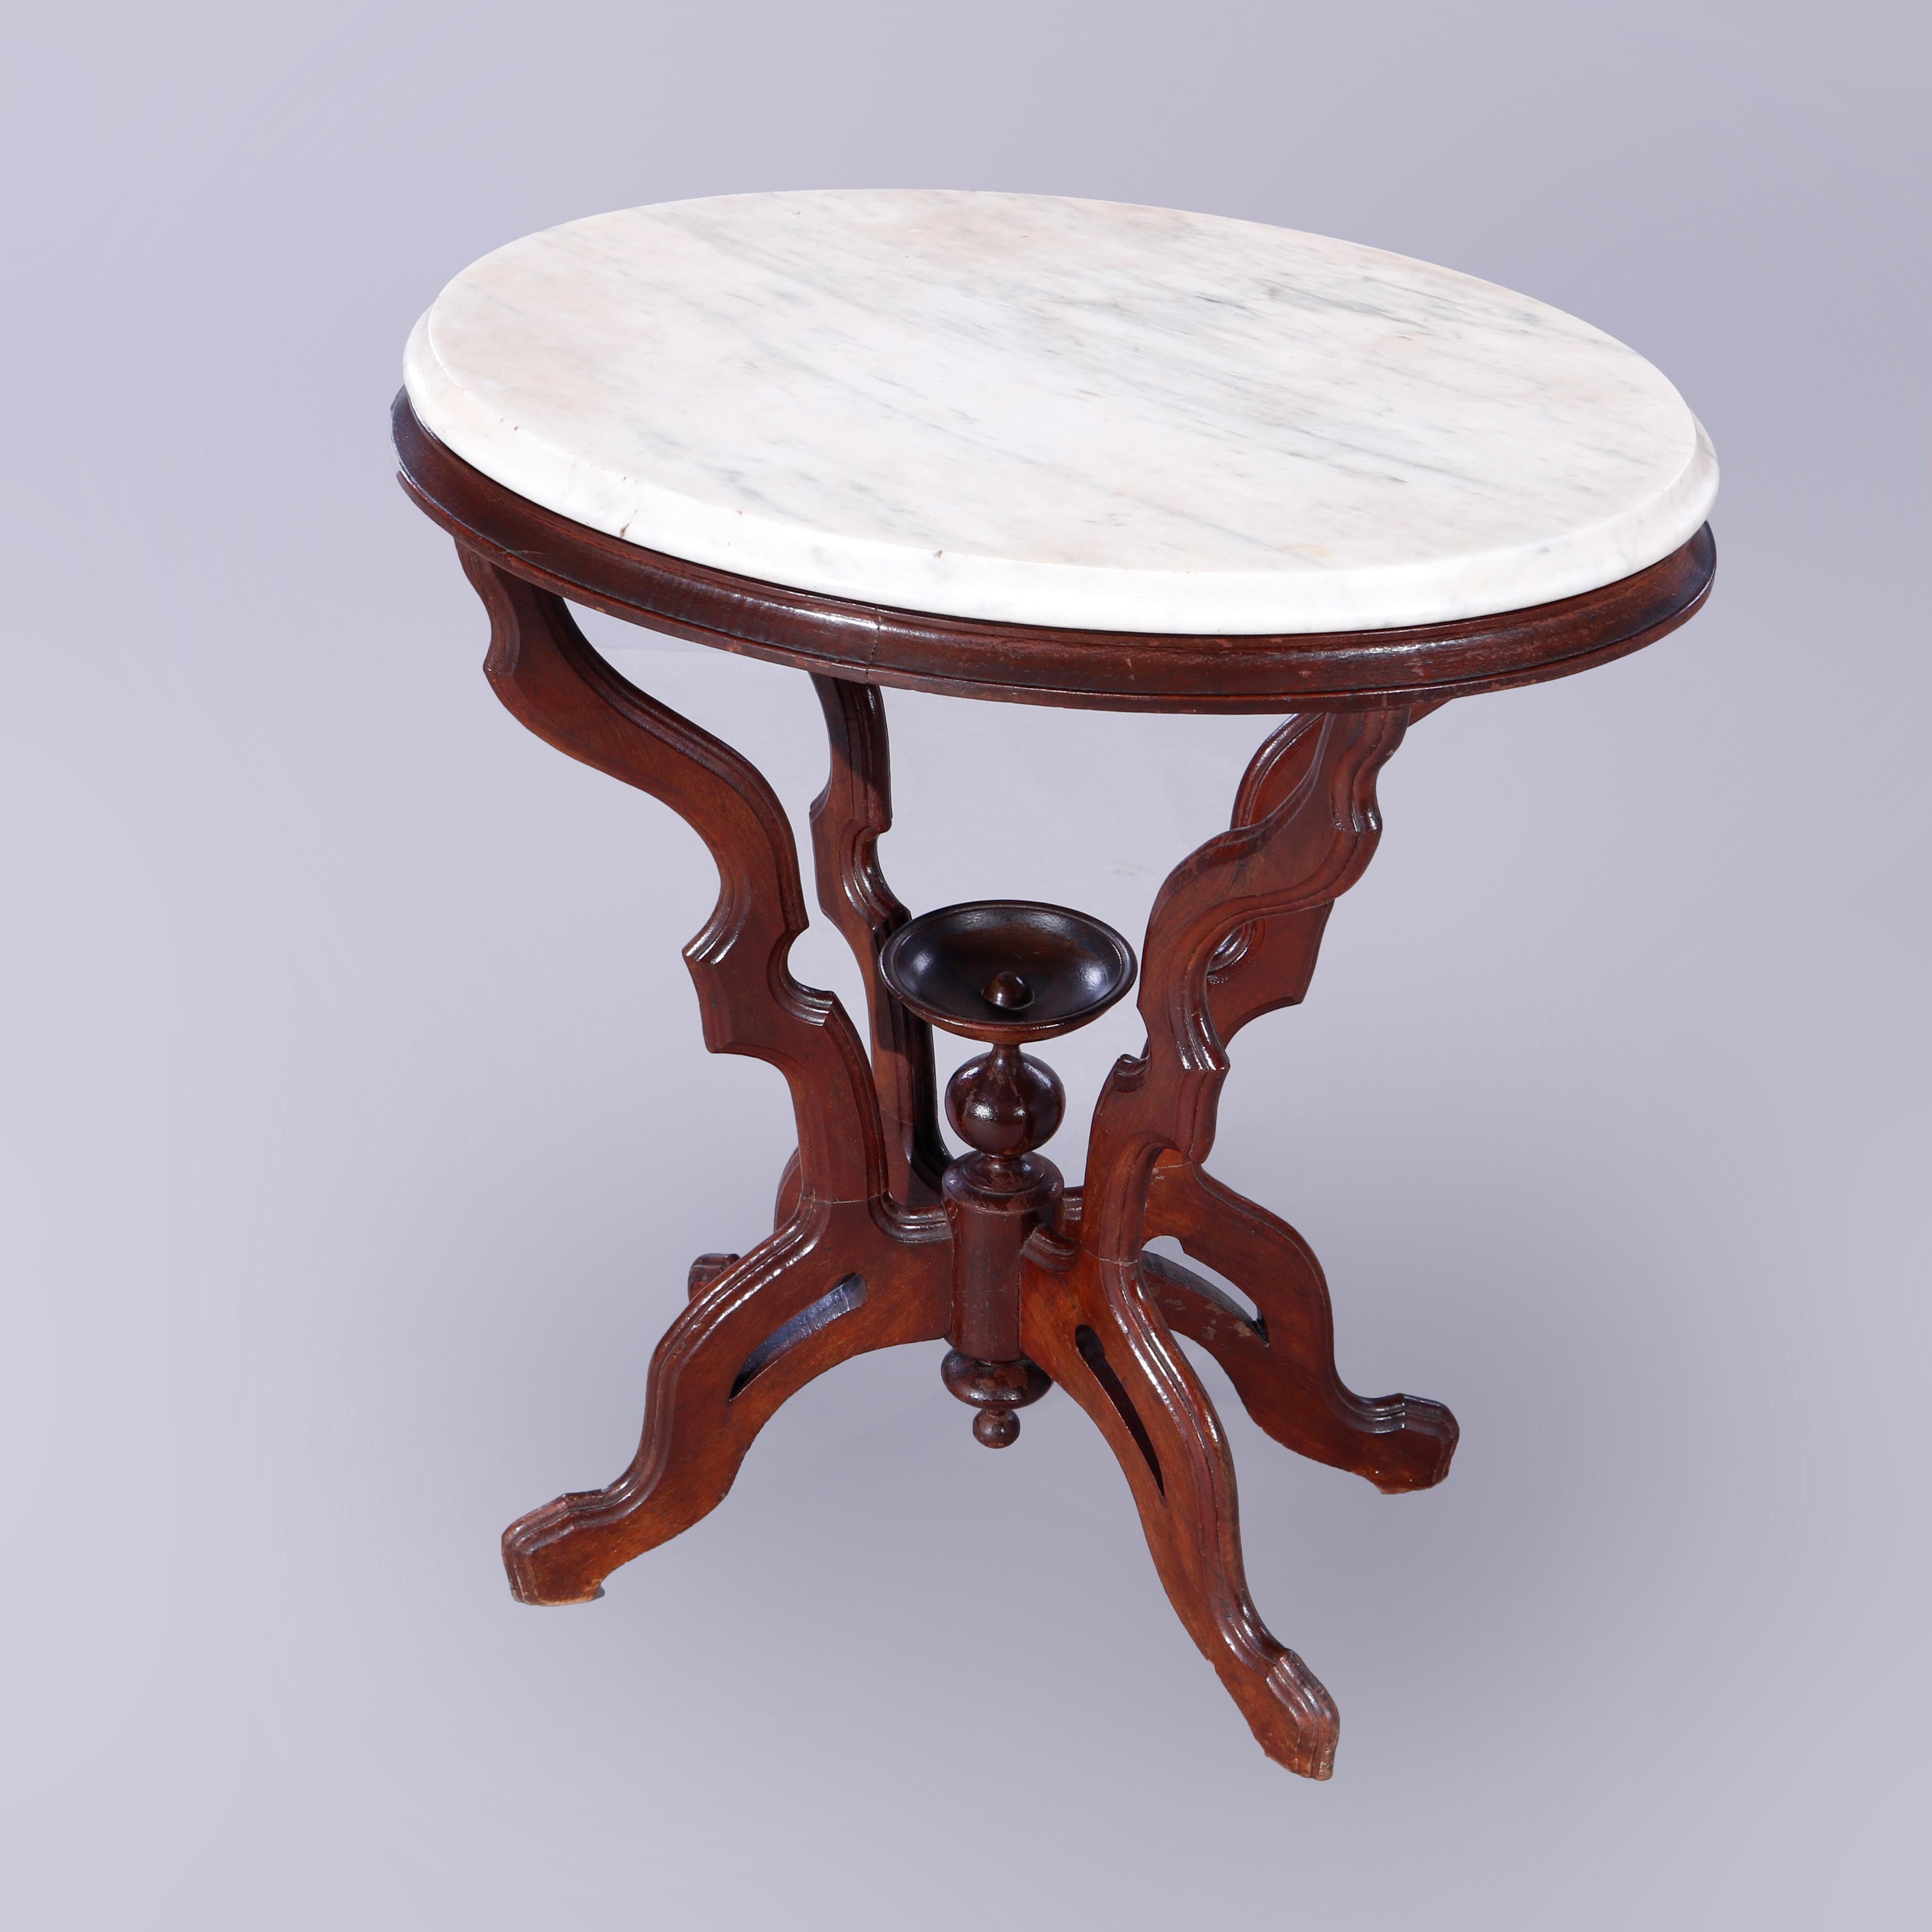 American Antique Eastlake Oval Walnut & Marble Parlor Table, c1890